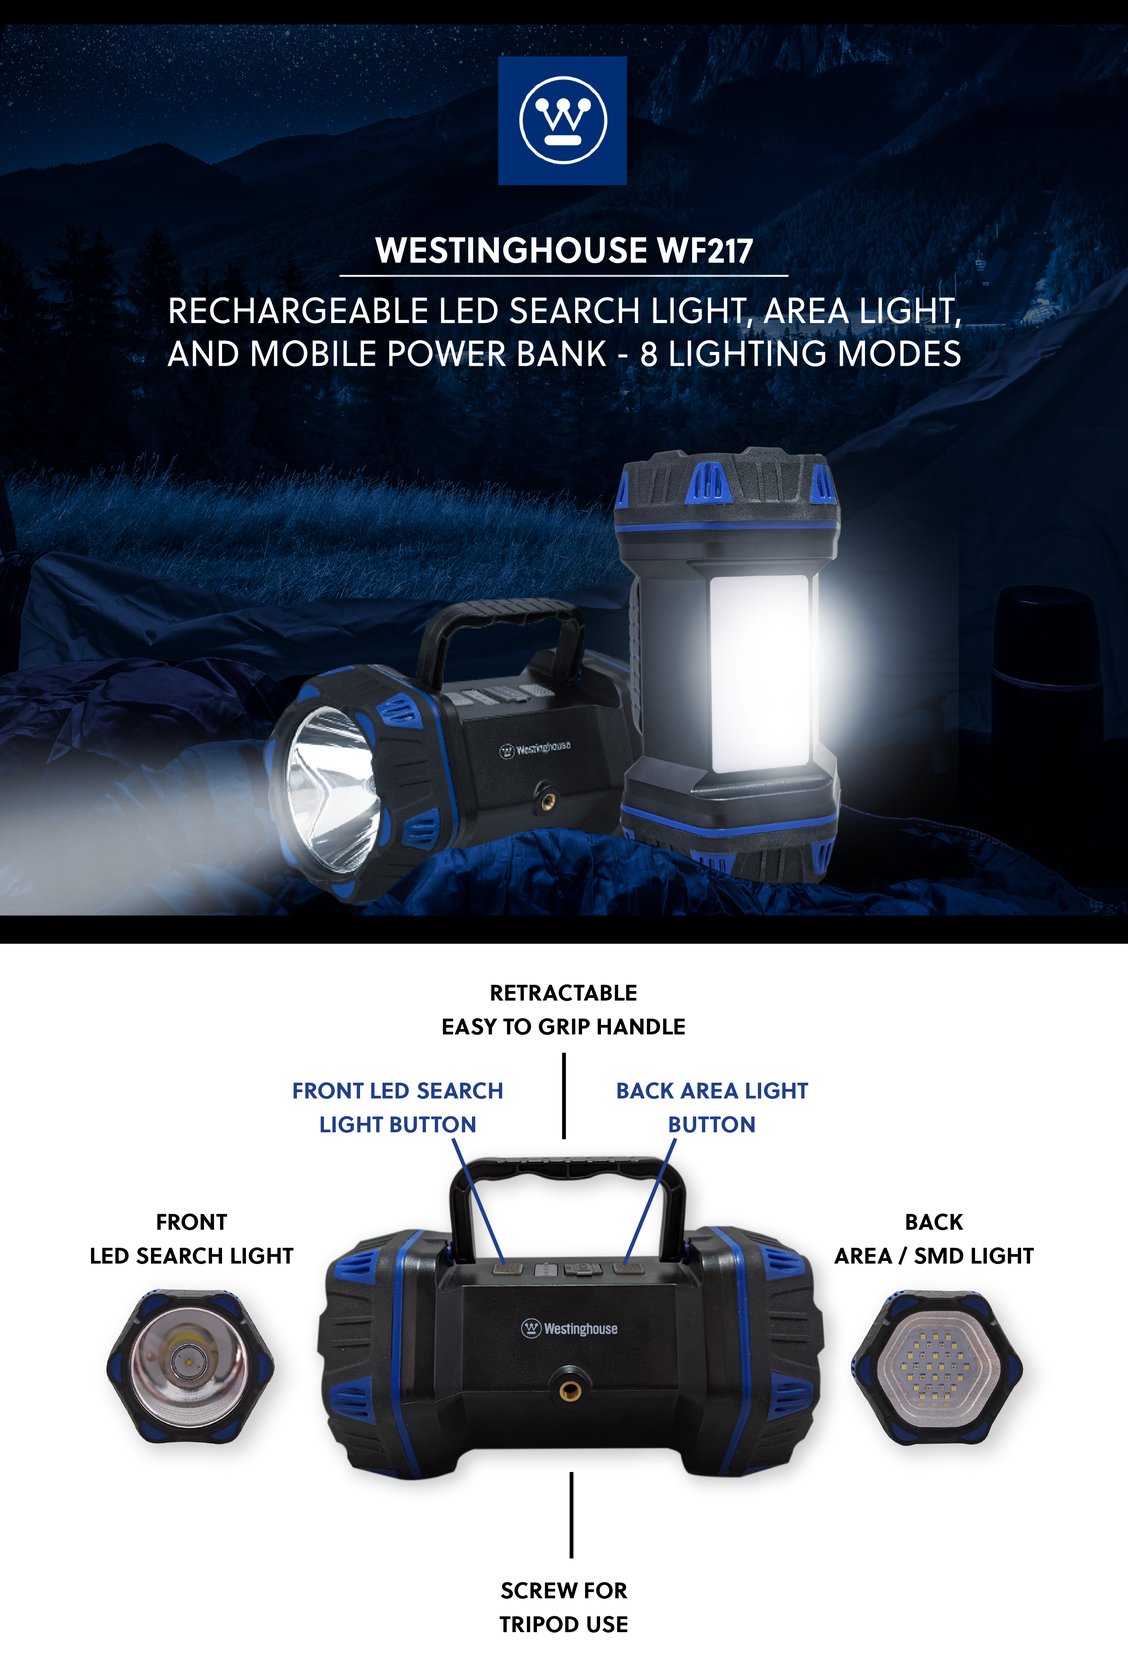 WF217 Rechargeable Search Light, Area Light, Mobile Power Bank - 8 Lighting Modes - Battery World